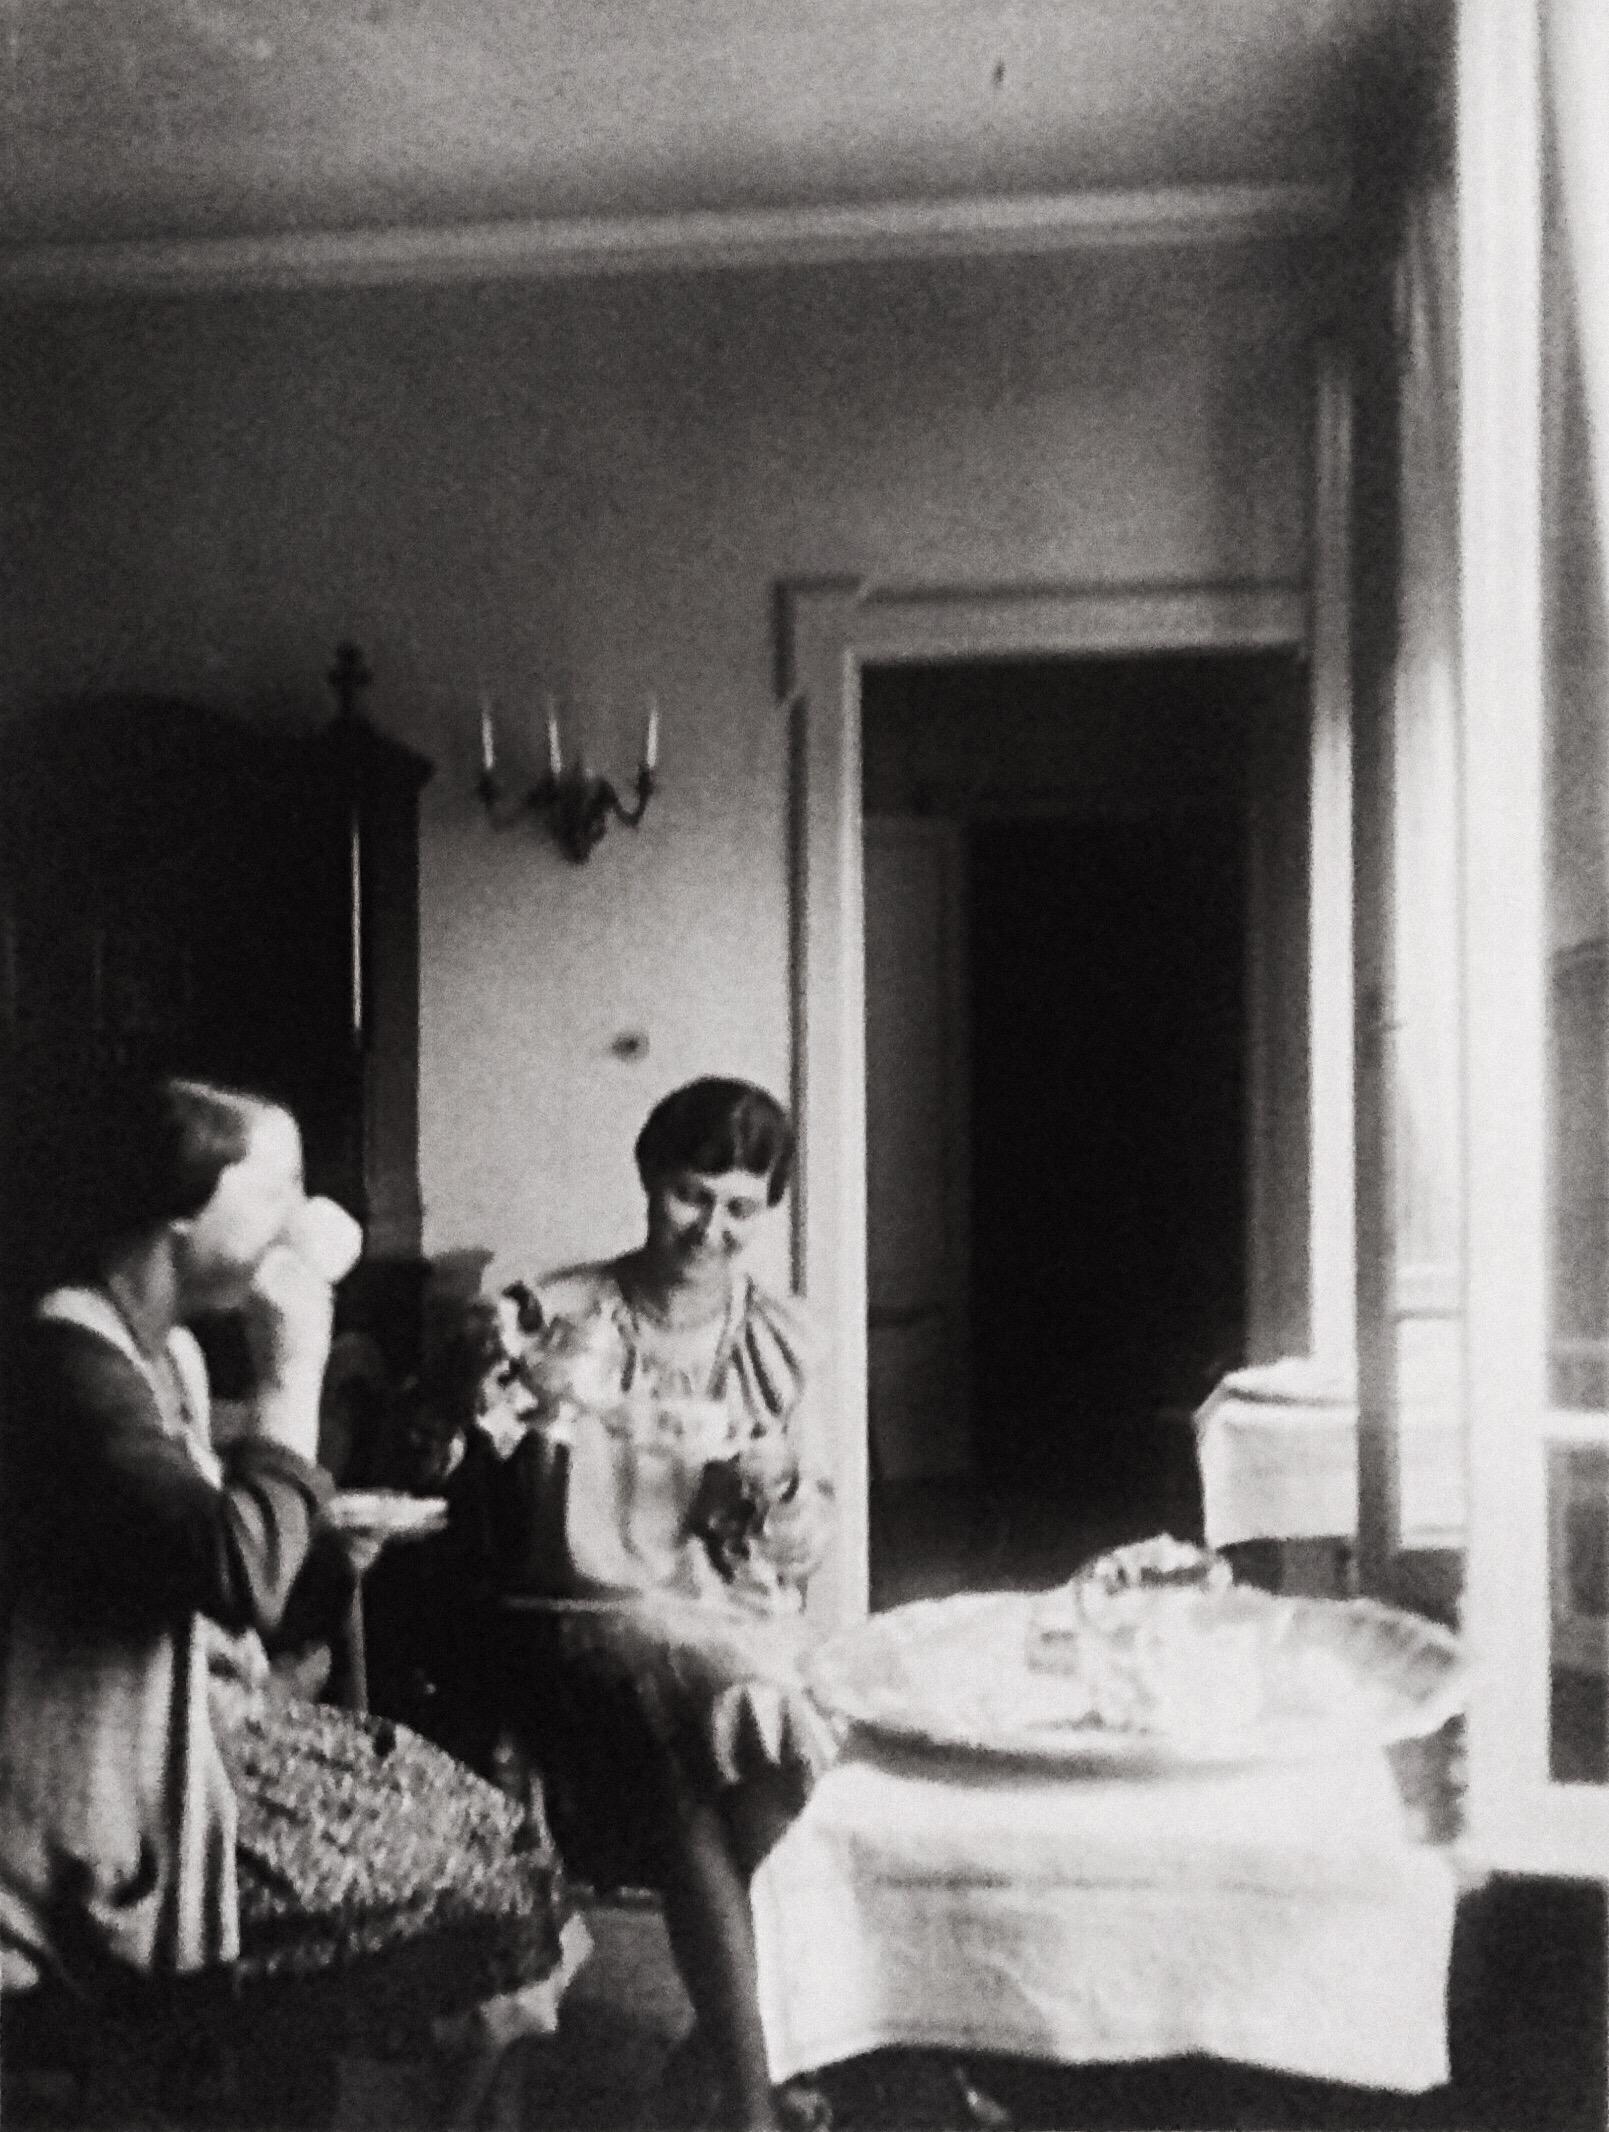 Beautiful Old Photographs - Tea Time with Chiara (BNID0028)